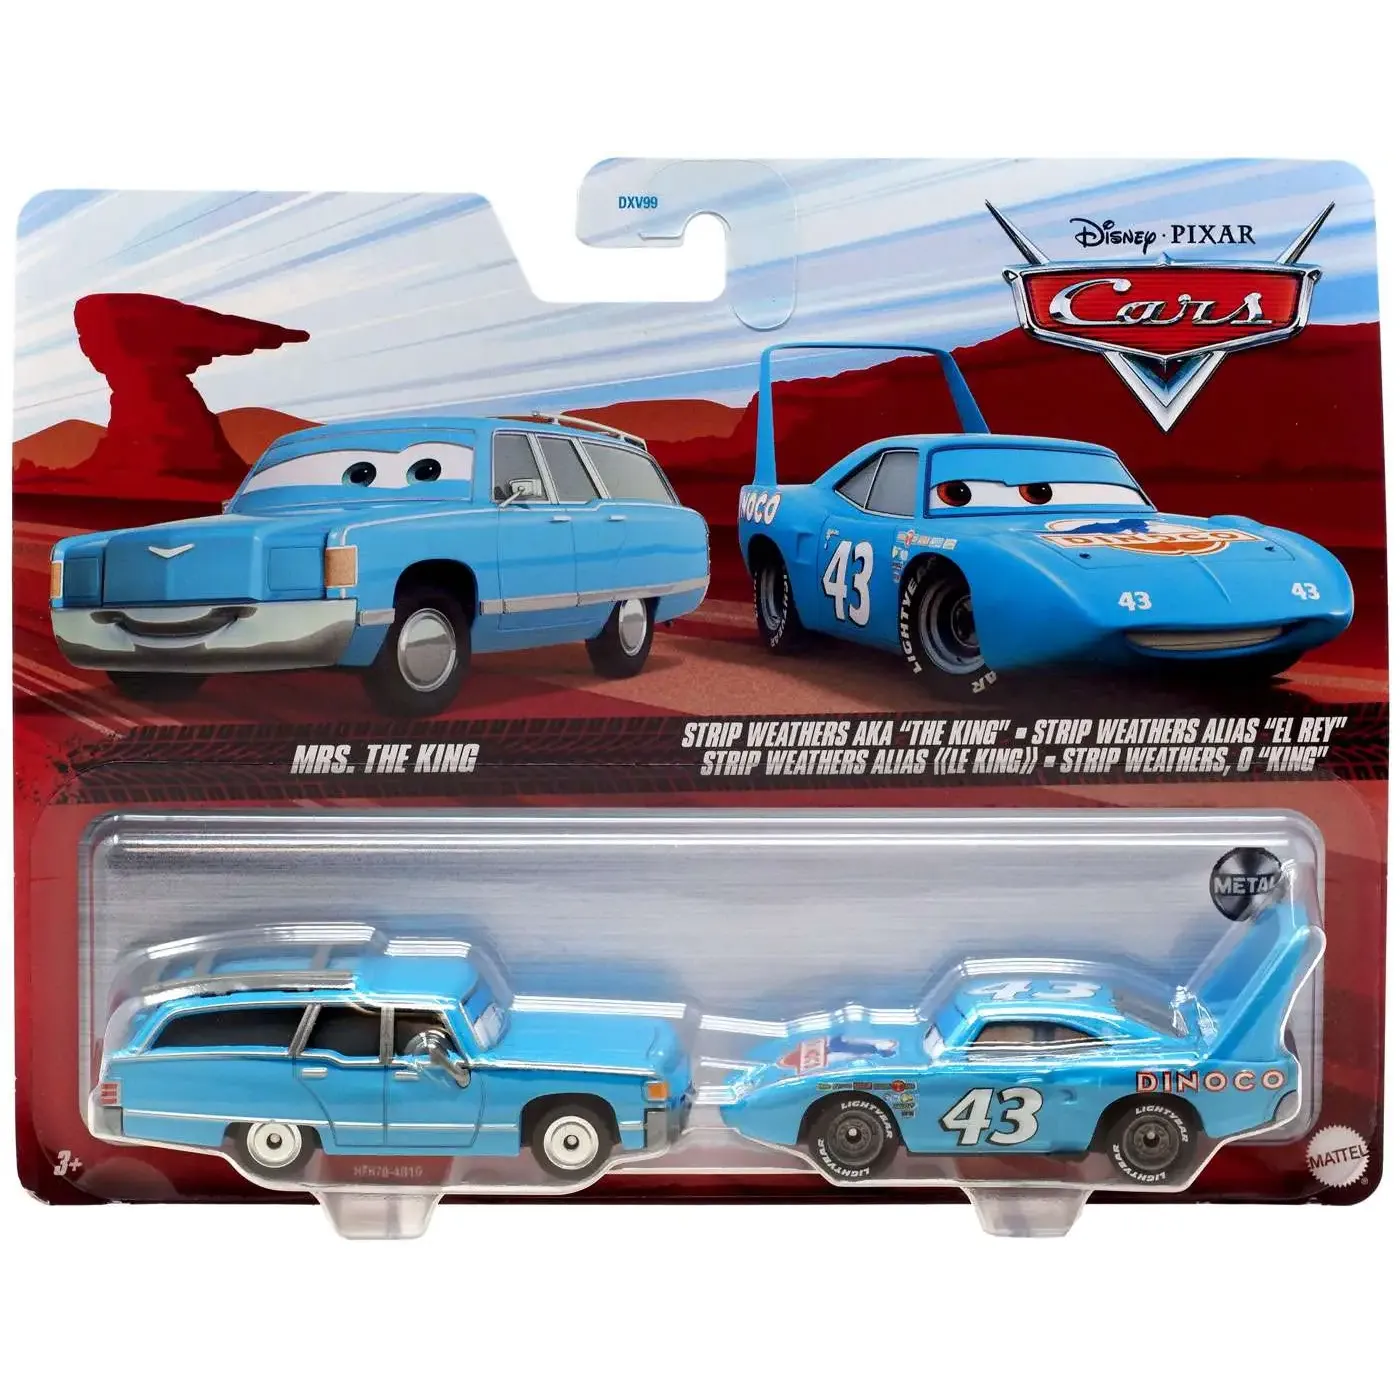 Disney Pixar Cars 3 Diecast 2-Pack Featuring Mrs.The King and Strip Weathers